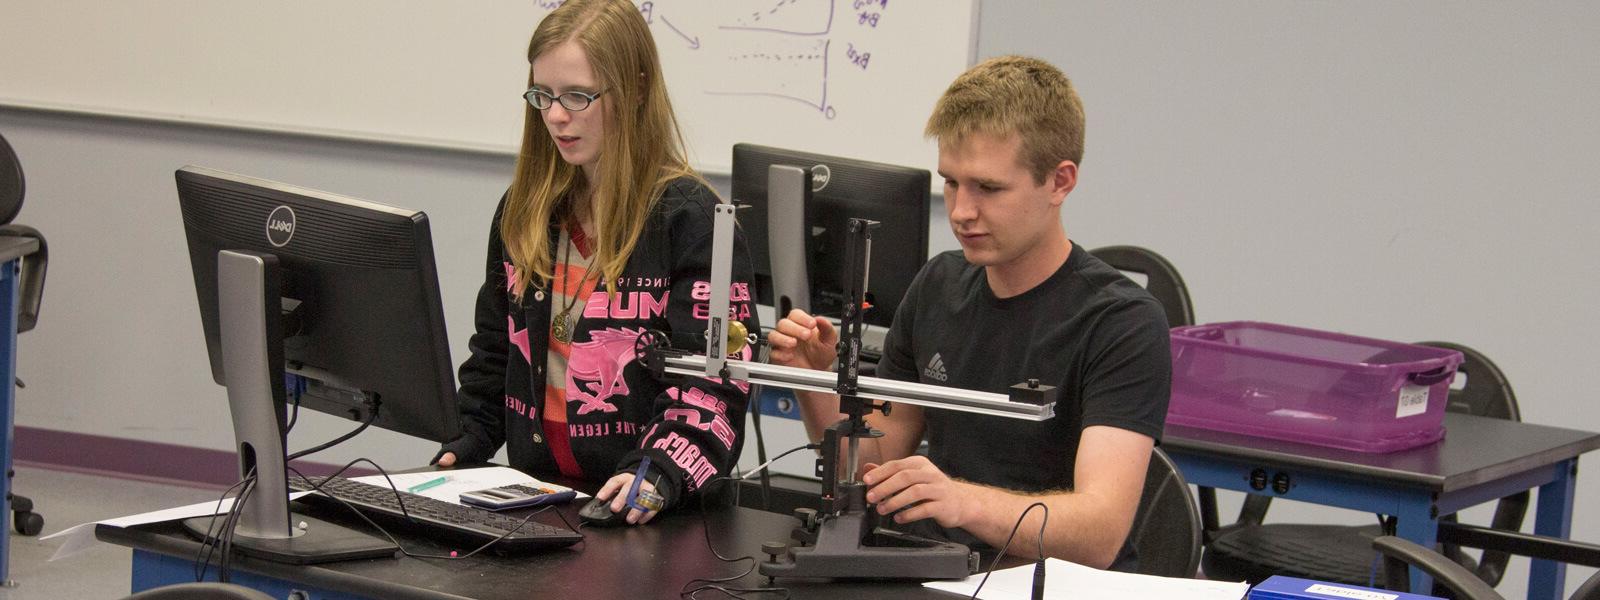 two students work on physics project